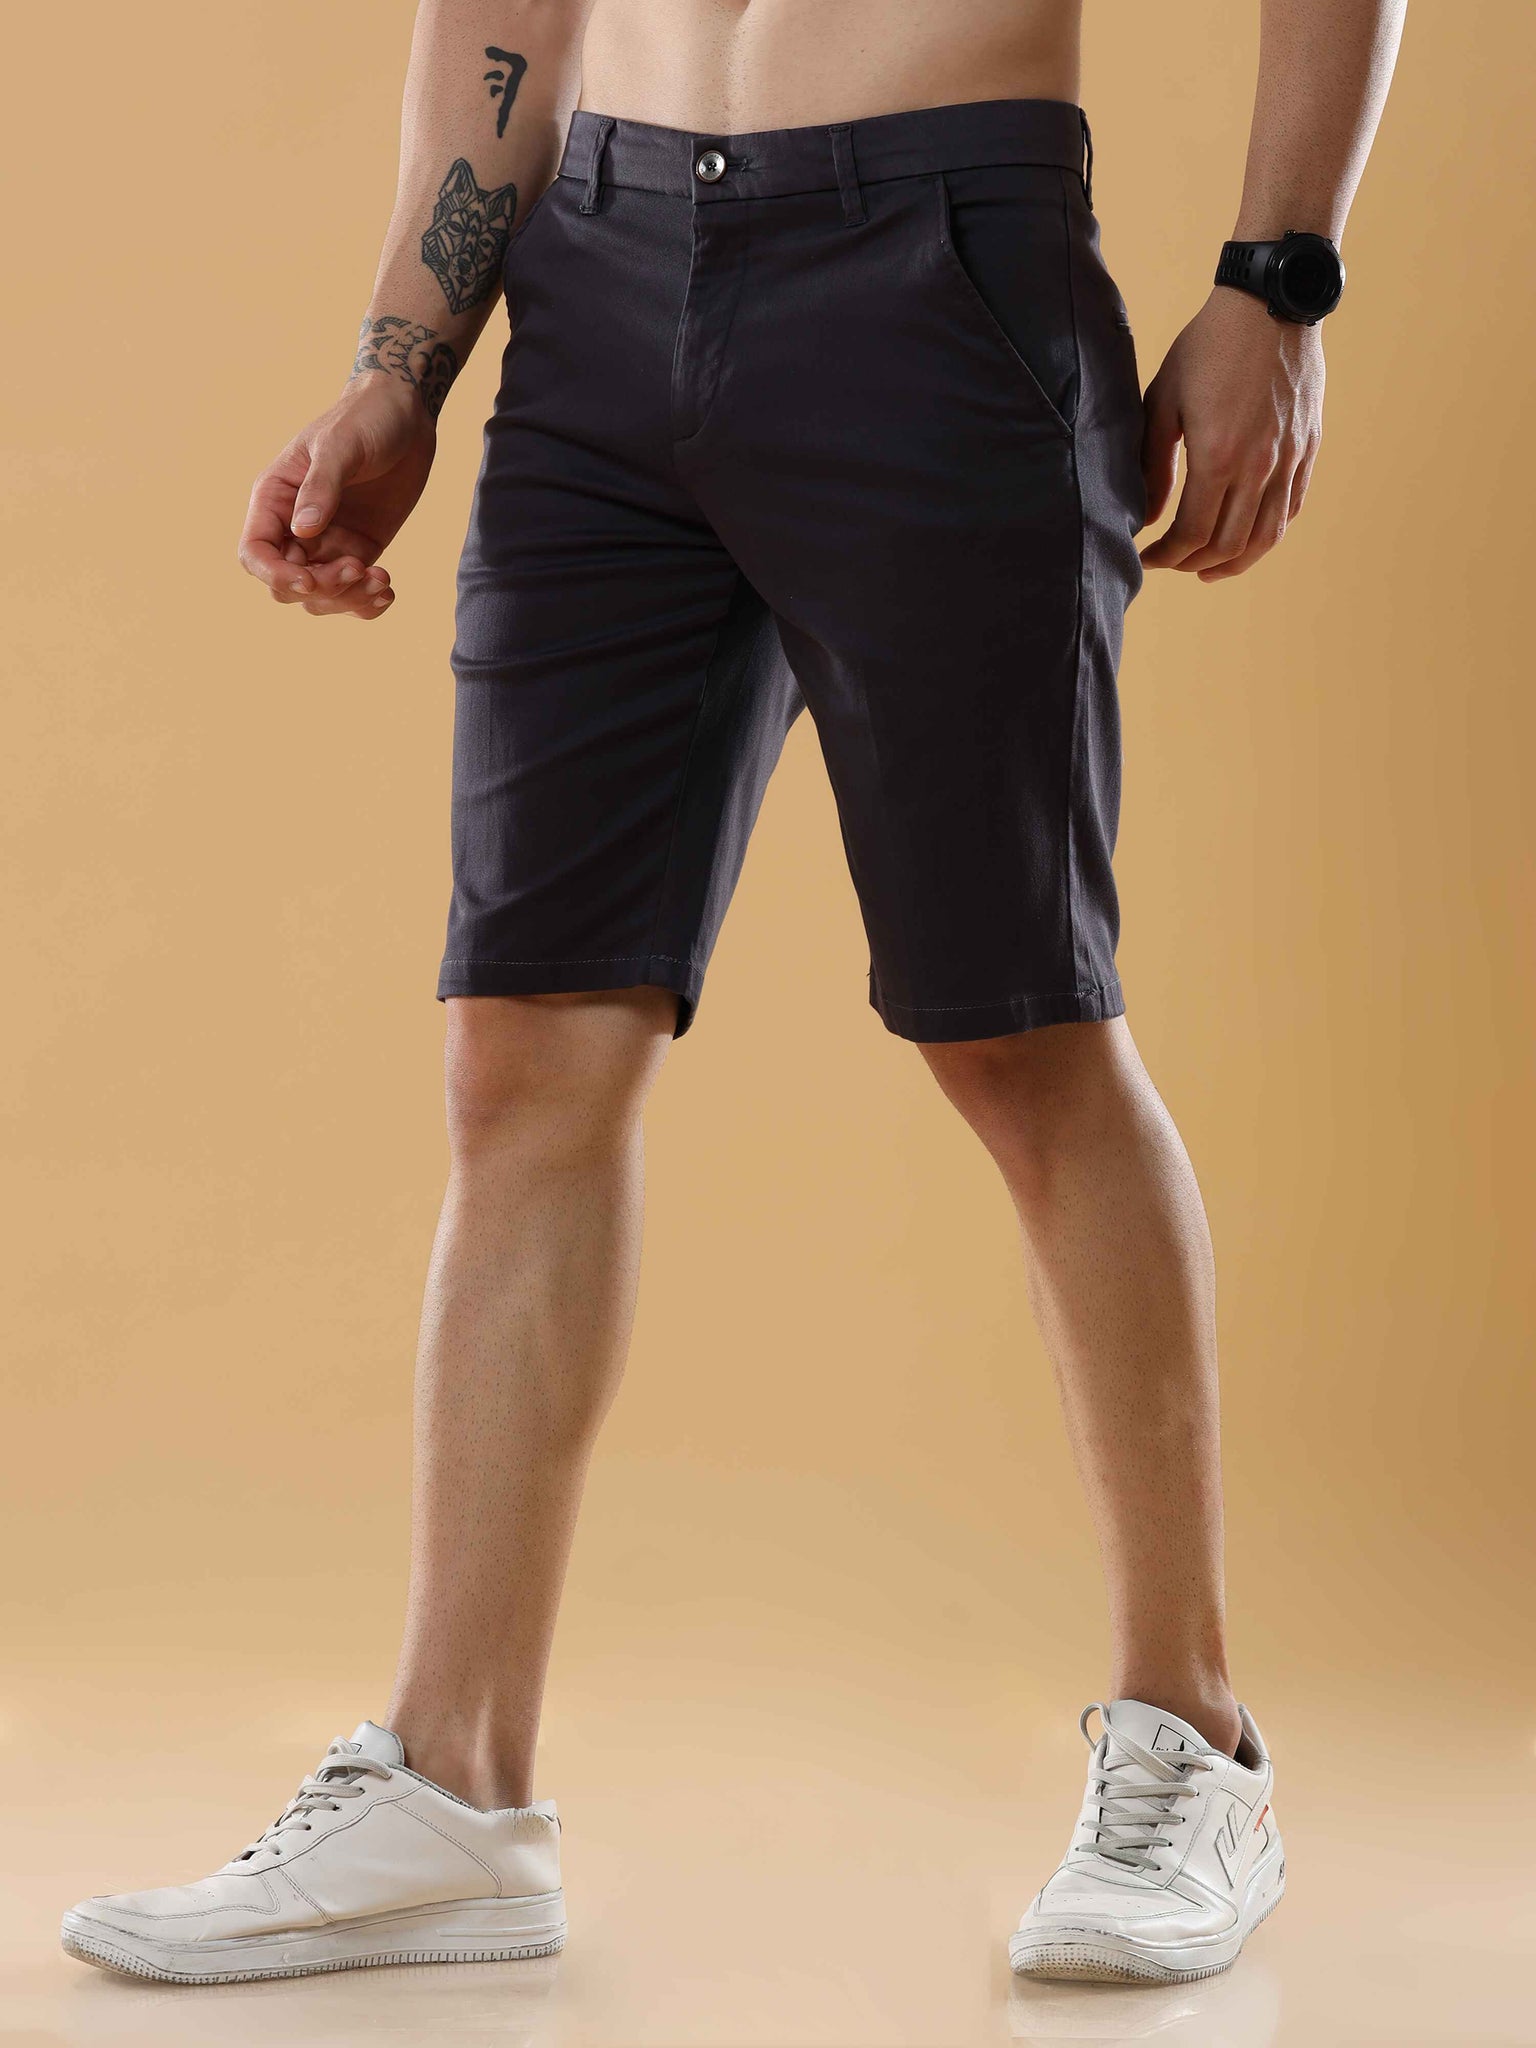 Carbon Black Feather Feel Shorts